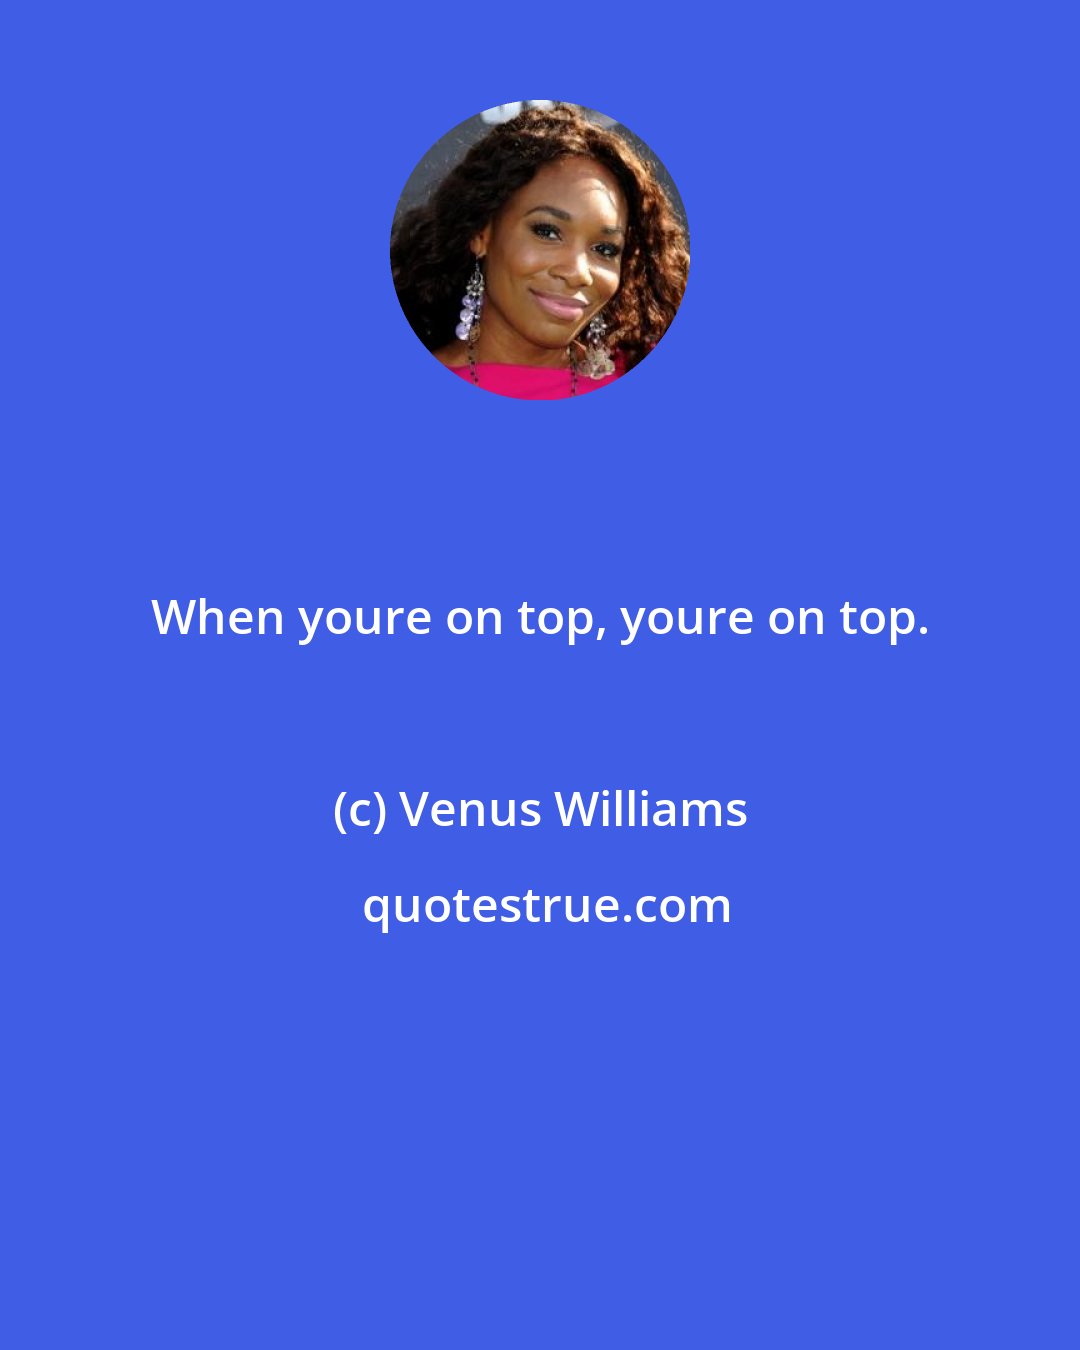 Venus Williams: When youre on top, youre on top.